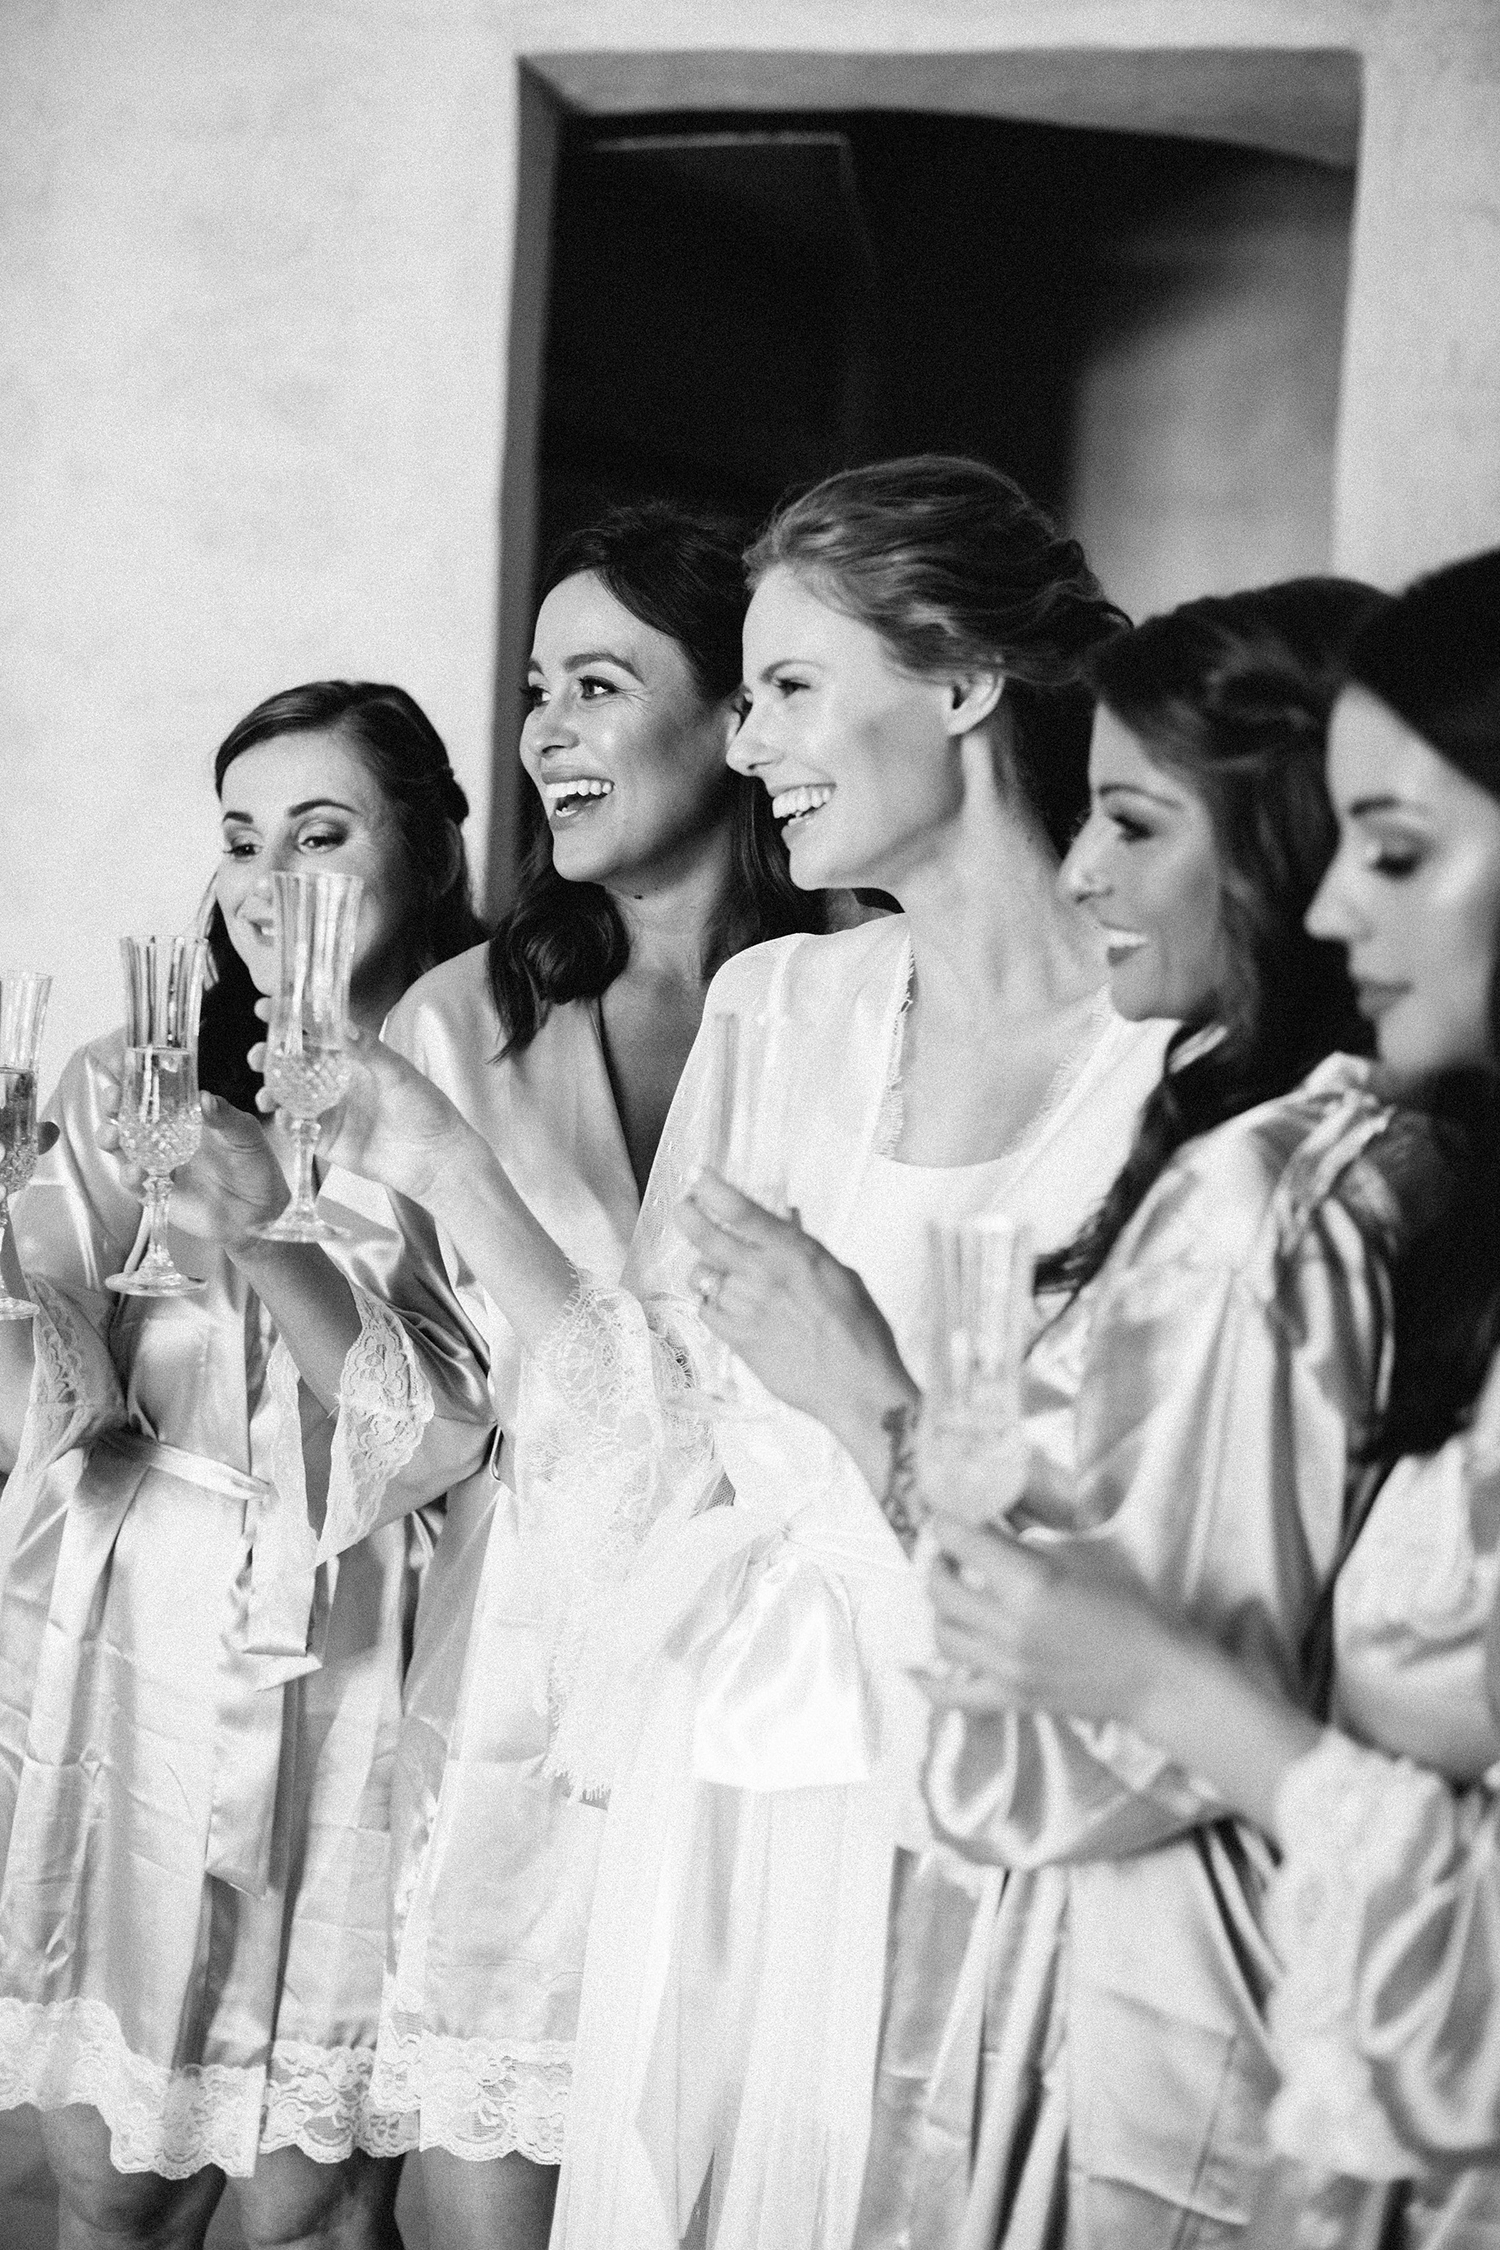 Miss USA 2011 Alyssa Campanella of The A List blog with her bridesmaids at her wedding